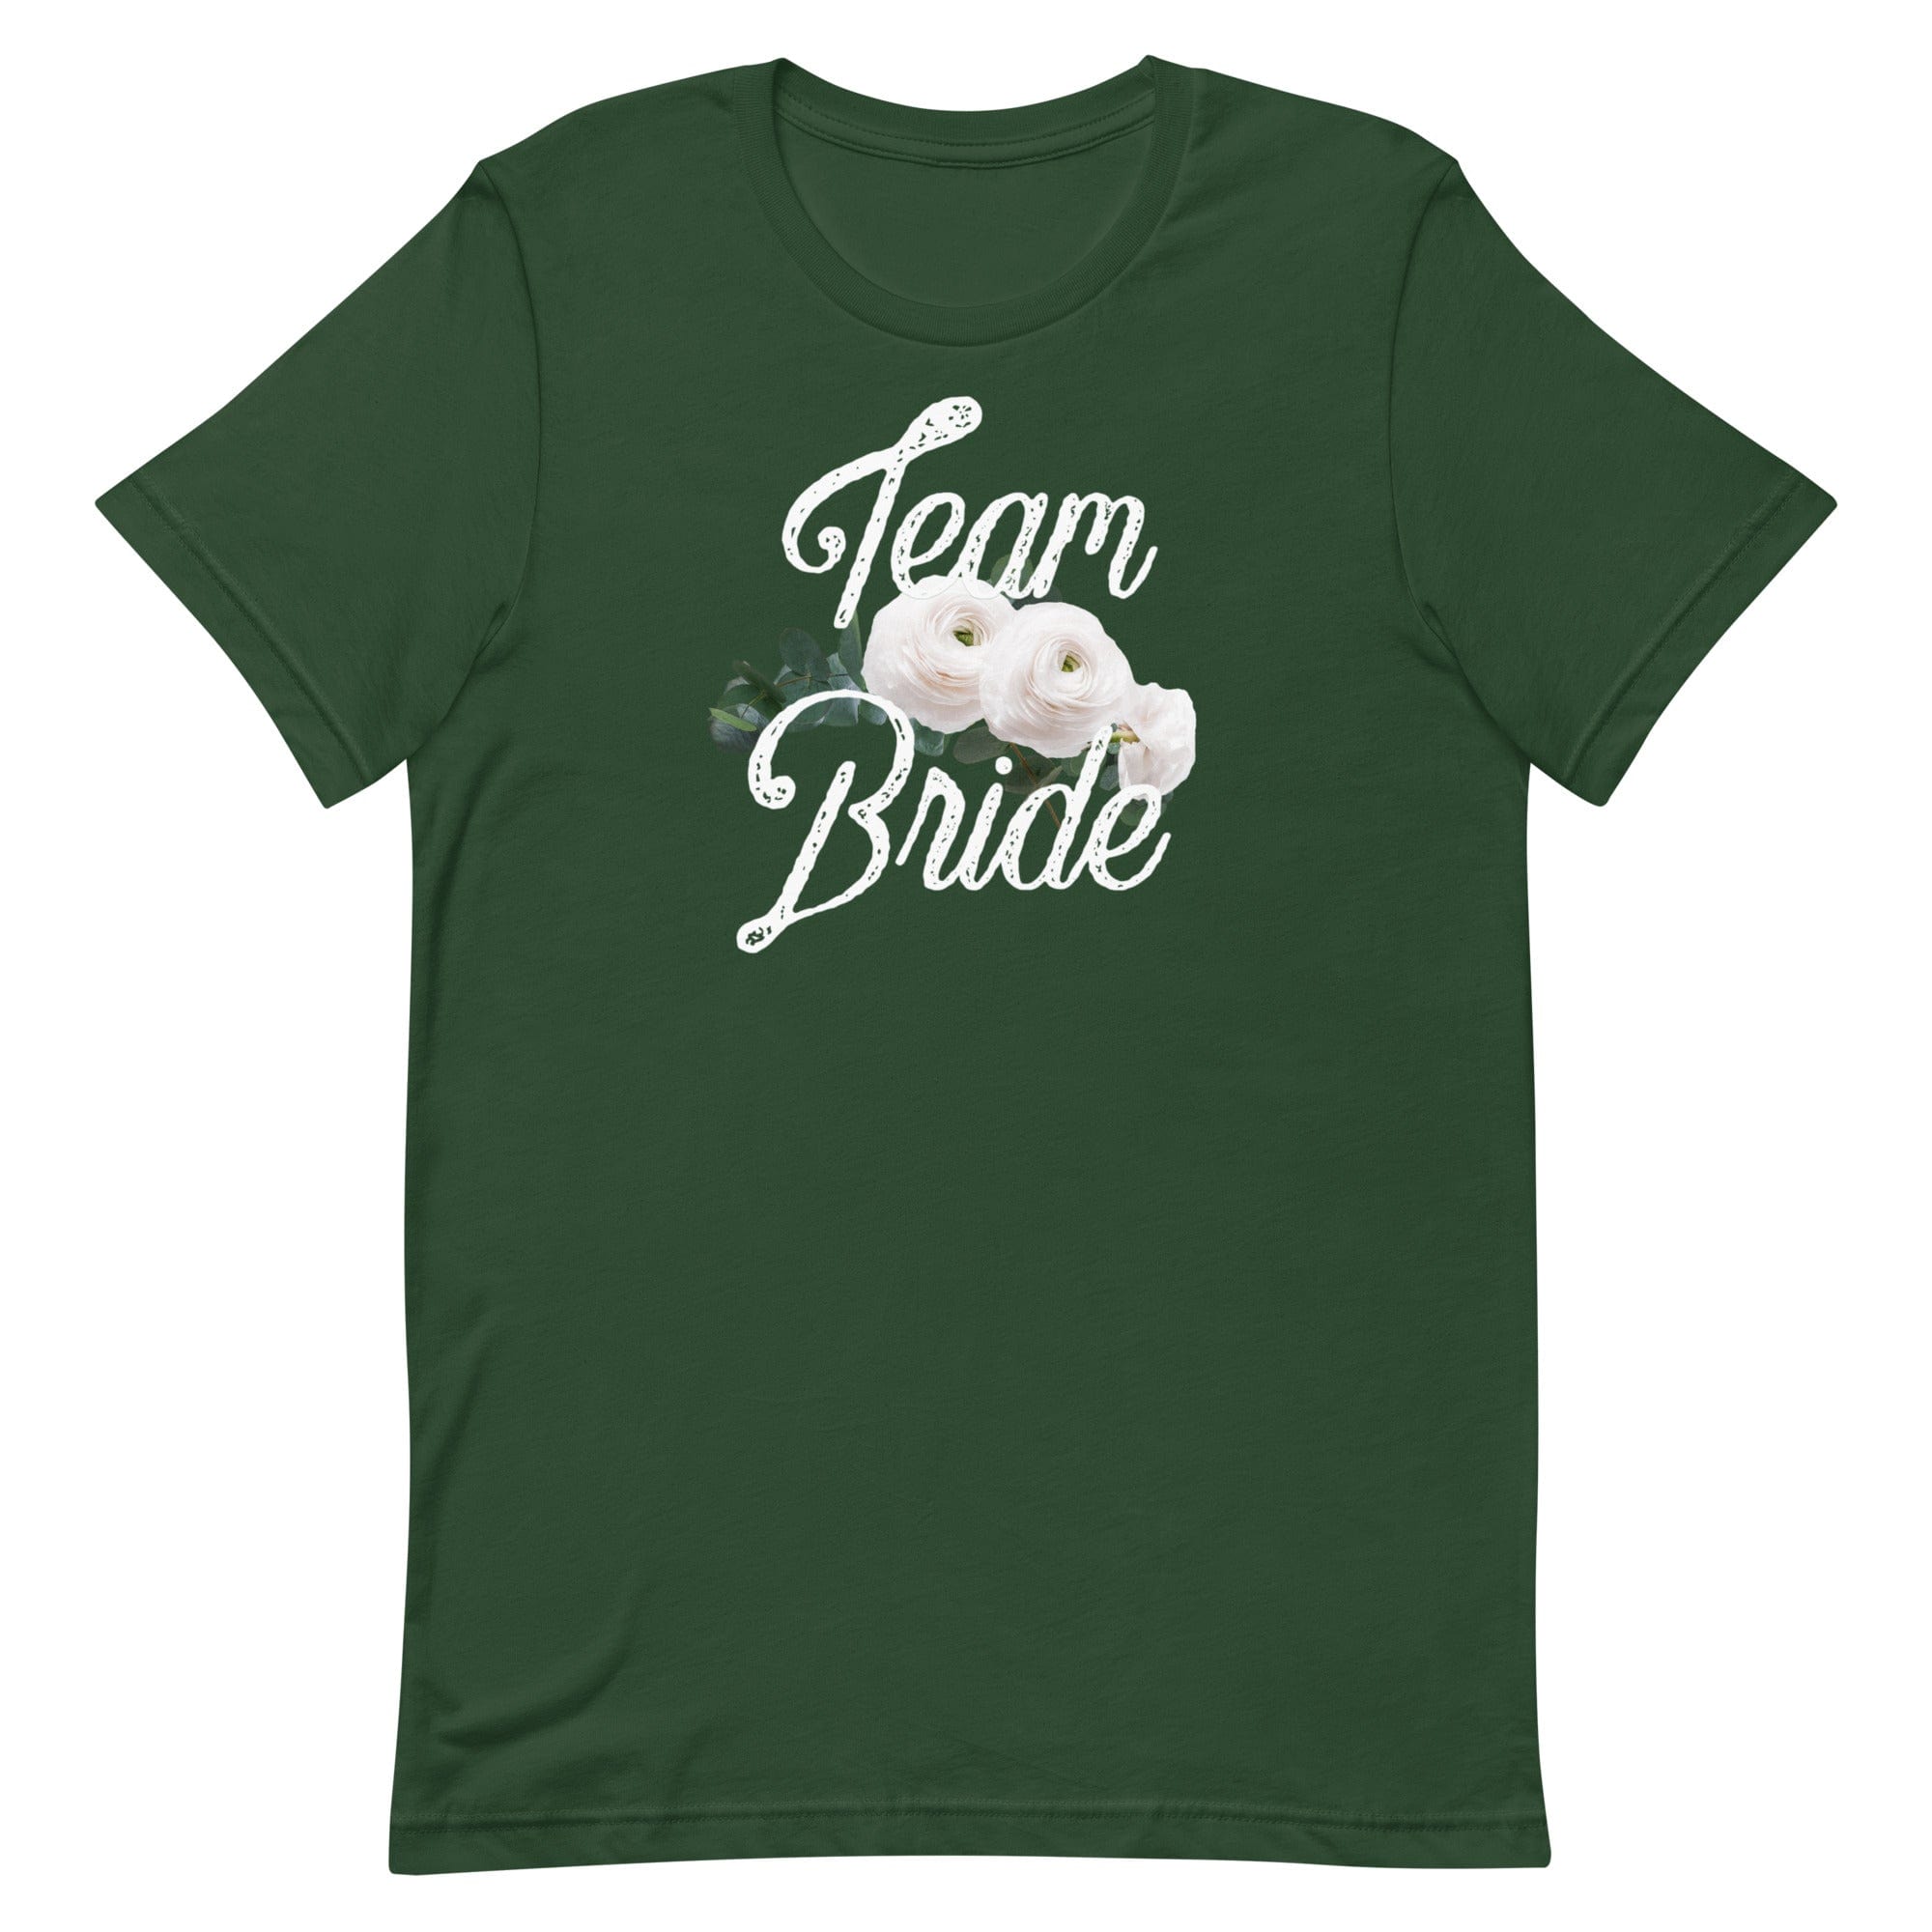 Spruced Roost Forest / S Team Bride Bridal Wedding Bachelorette T-shirt - XS-5XL